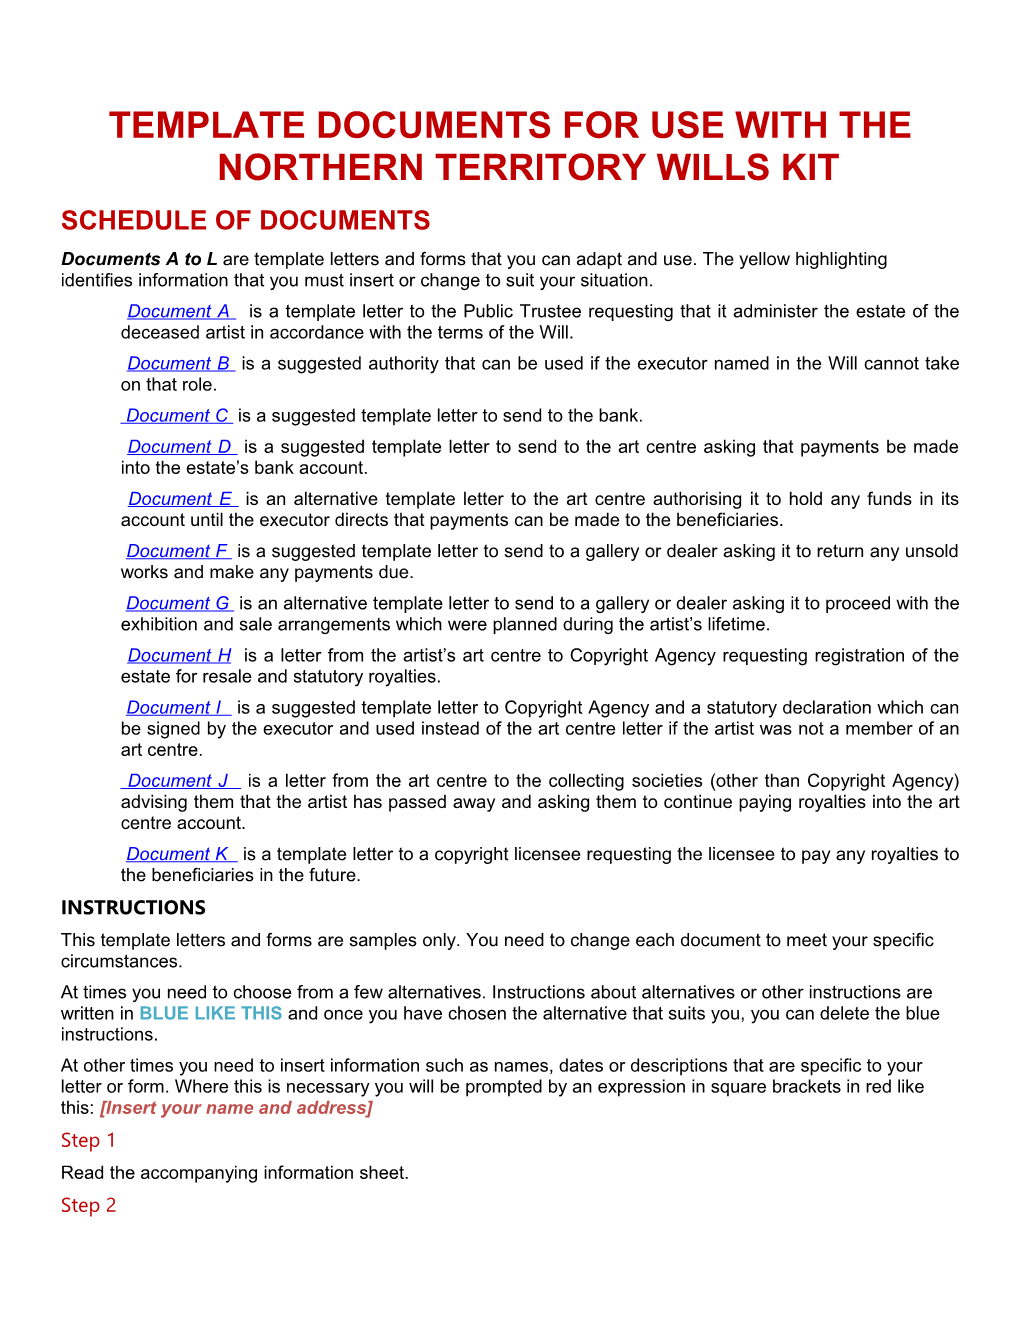 Template Documents for Use with the Northern Territory Wills Kit